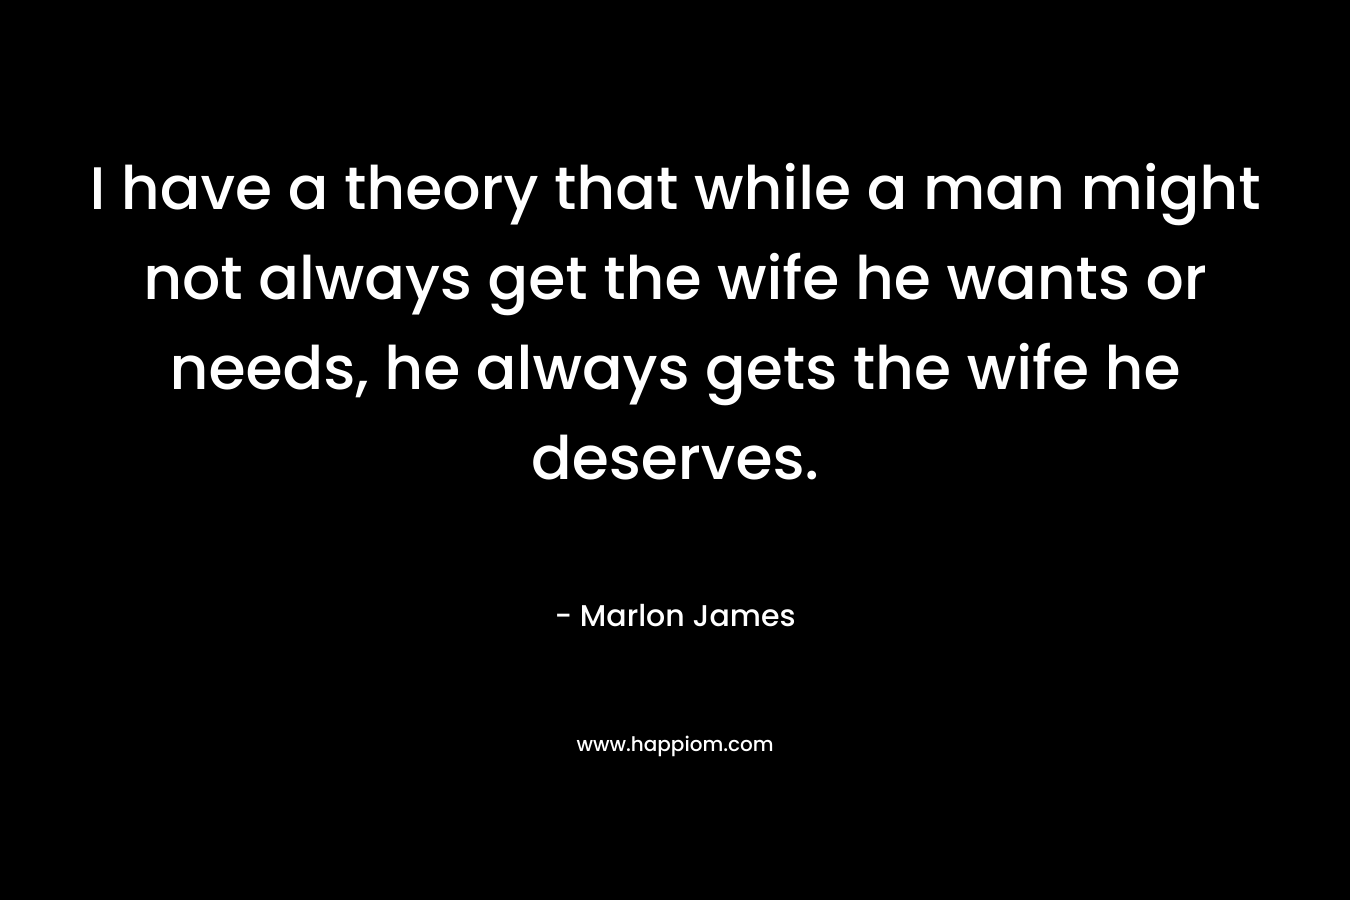 I have a theory that while a man might not always get the wife he wants or needs, he always gets the wife he deserves.